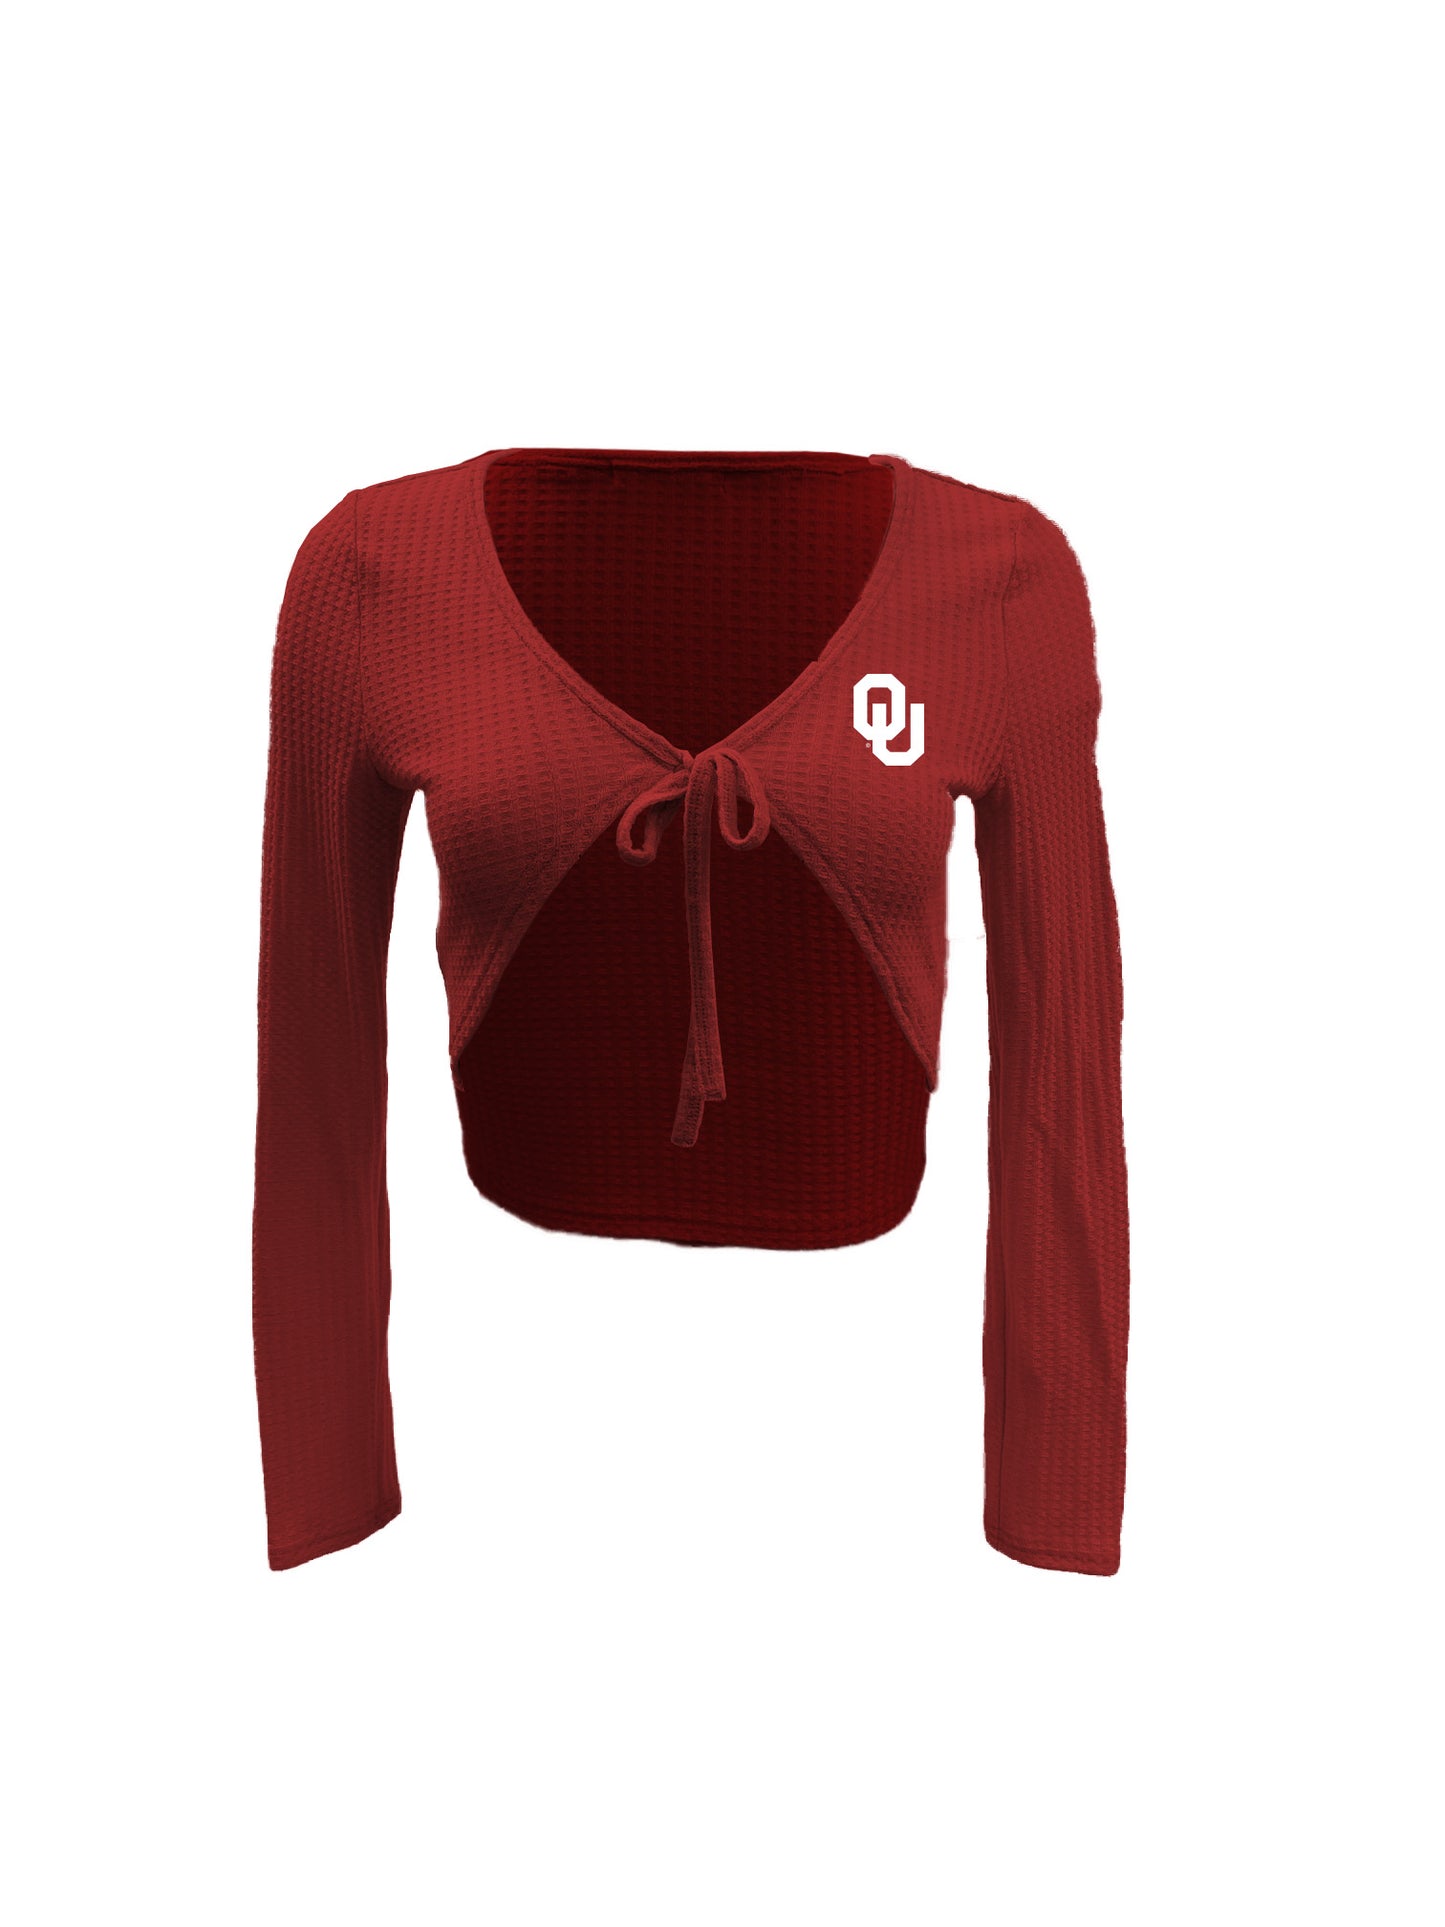 Oklahoma Sooners Women's Wes and Willy Long Sleeve Tie Front Crop Top